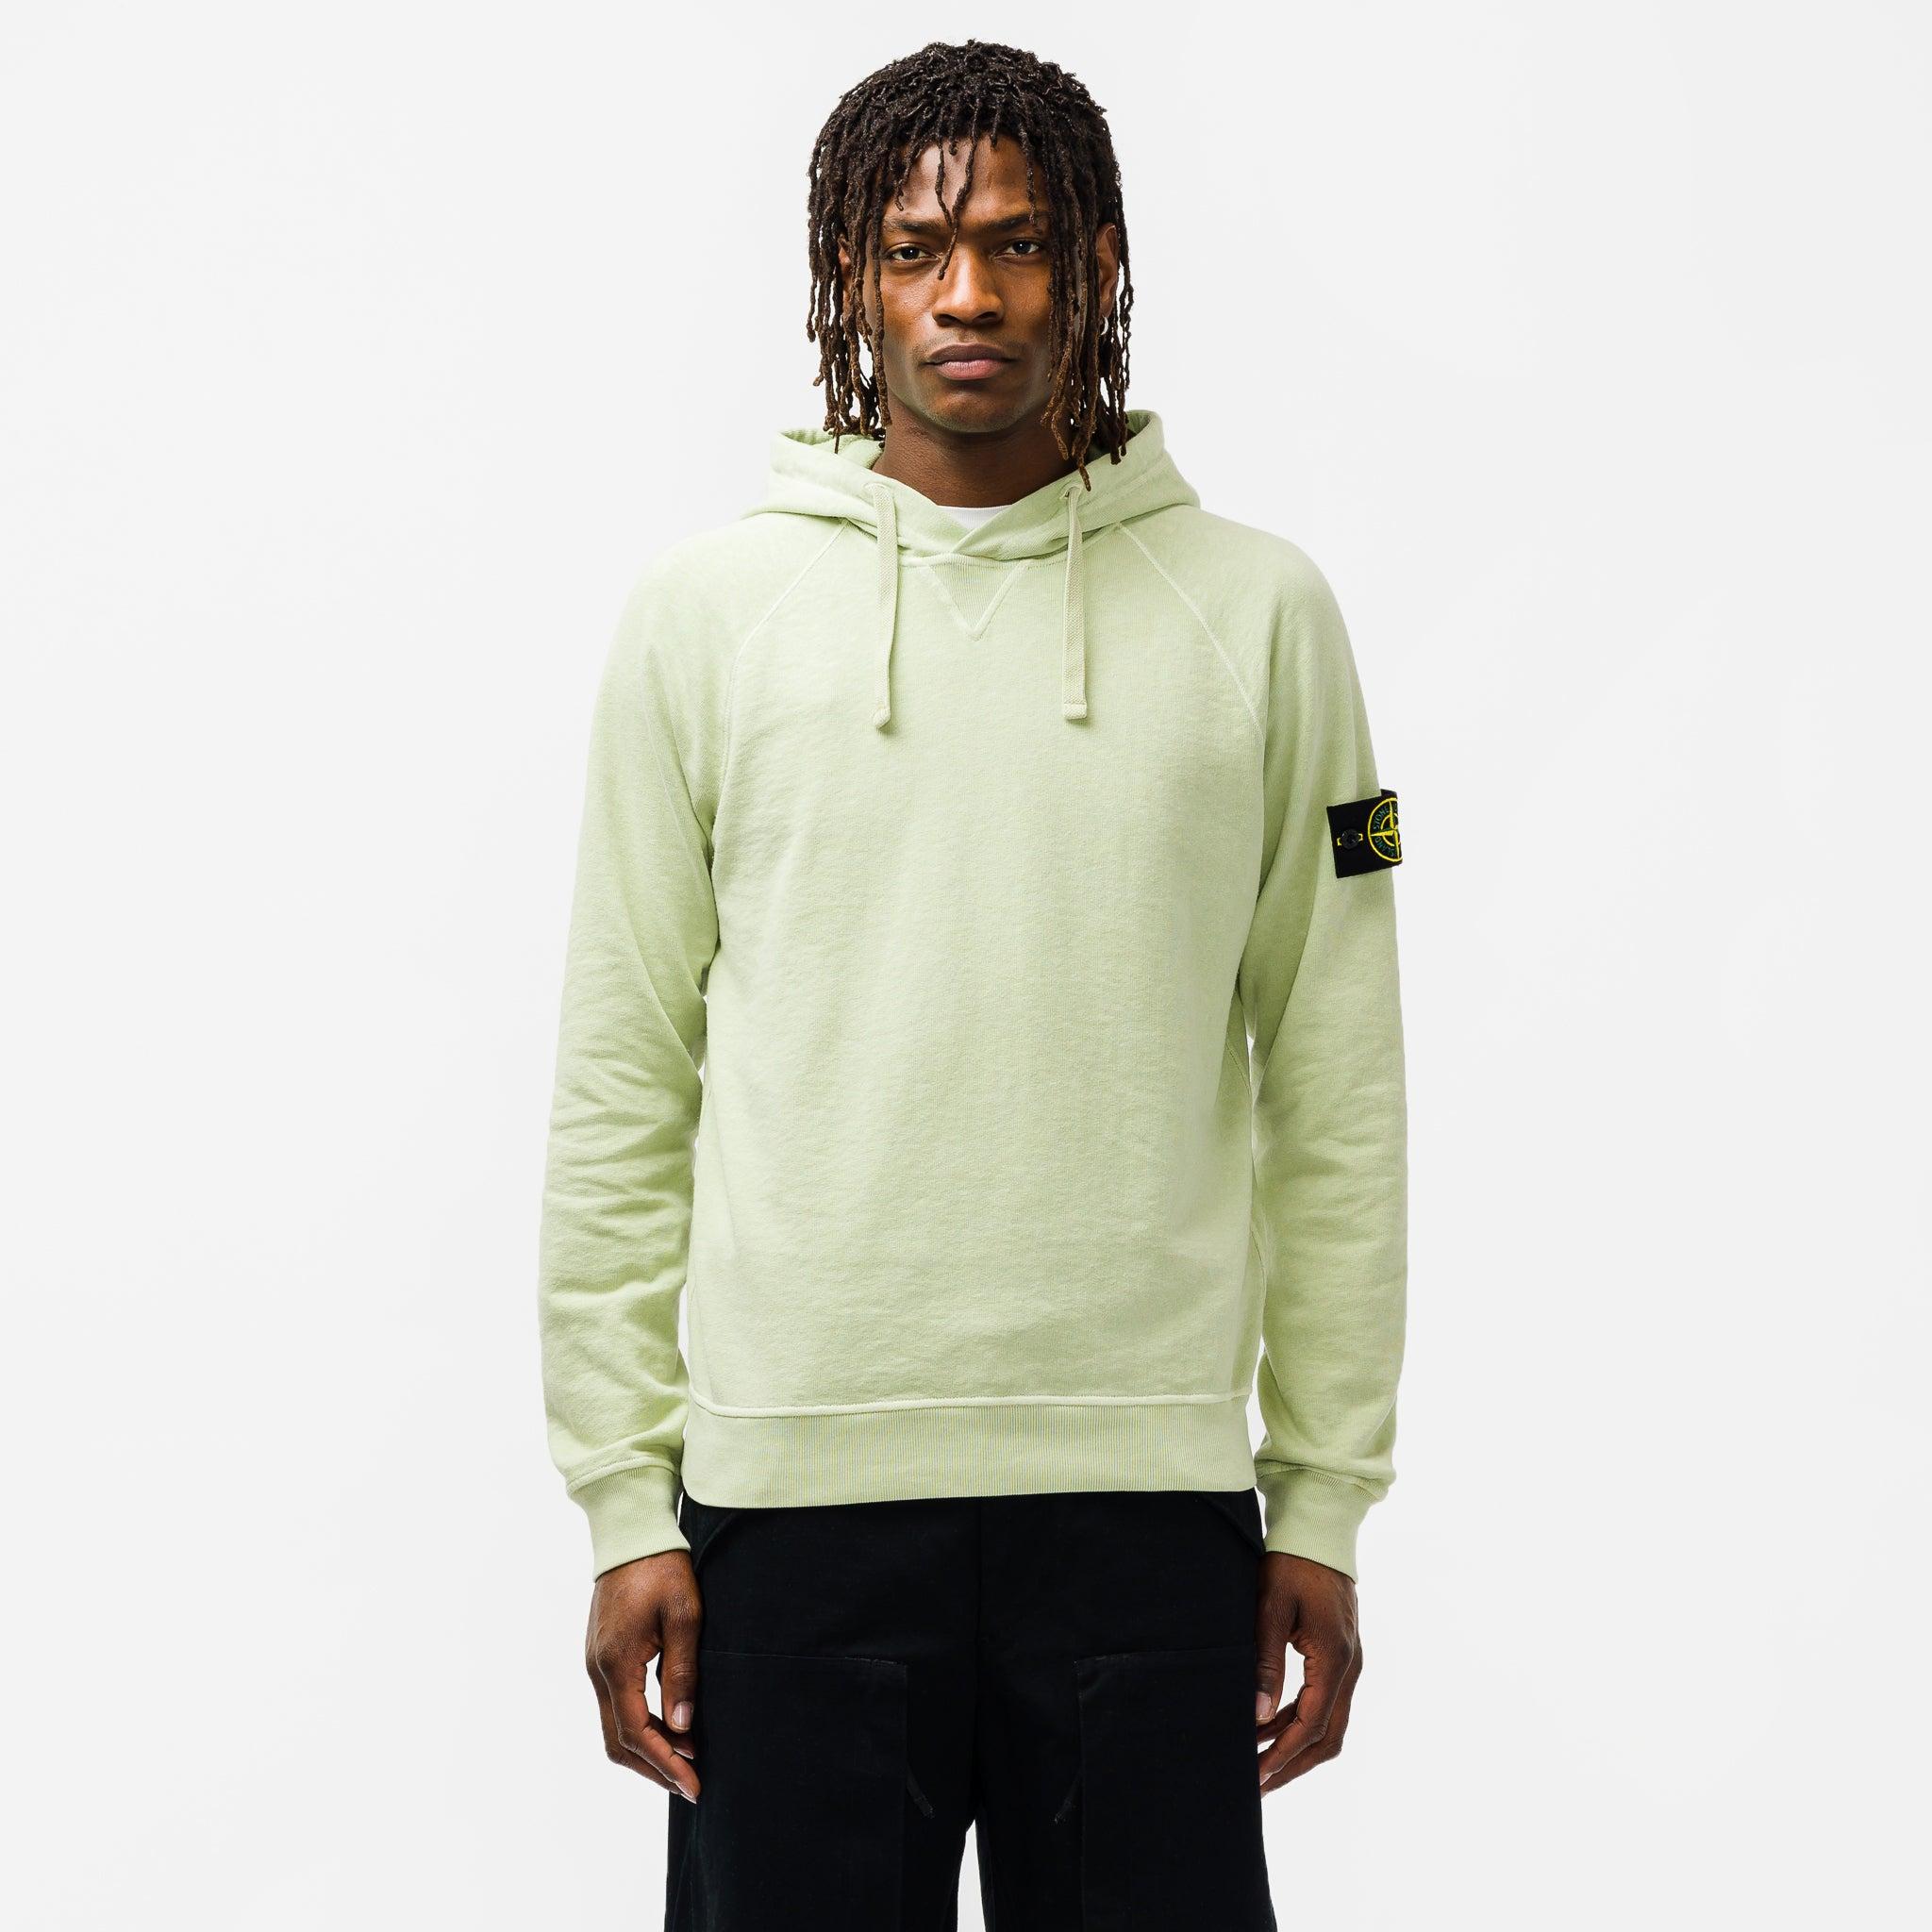 Stone Island Cotton 62160 Malfile Garment Dyed Hoodie in Light Green  (Green) for Men | Lyst